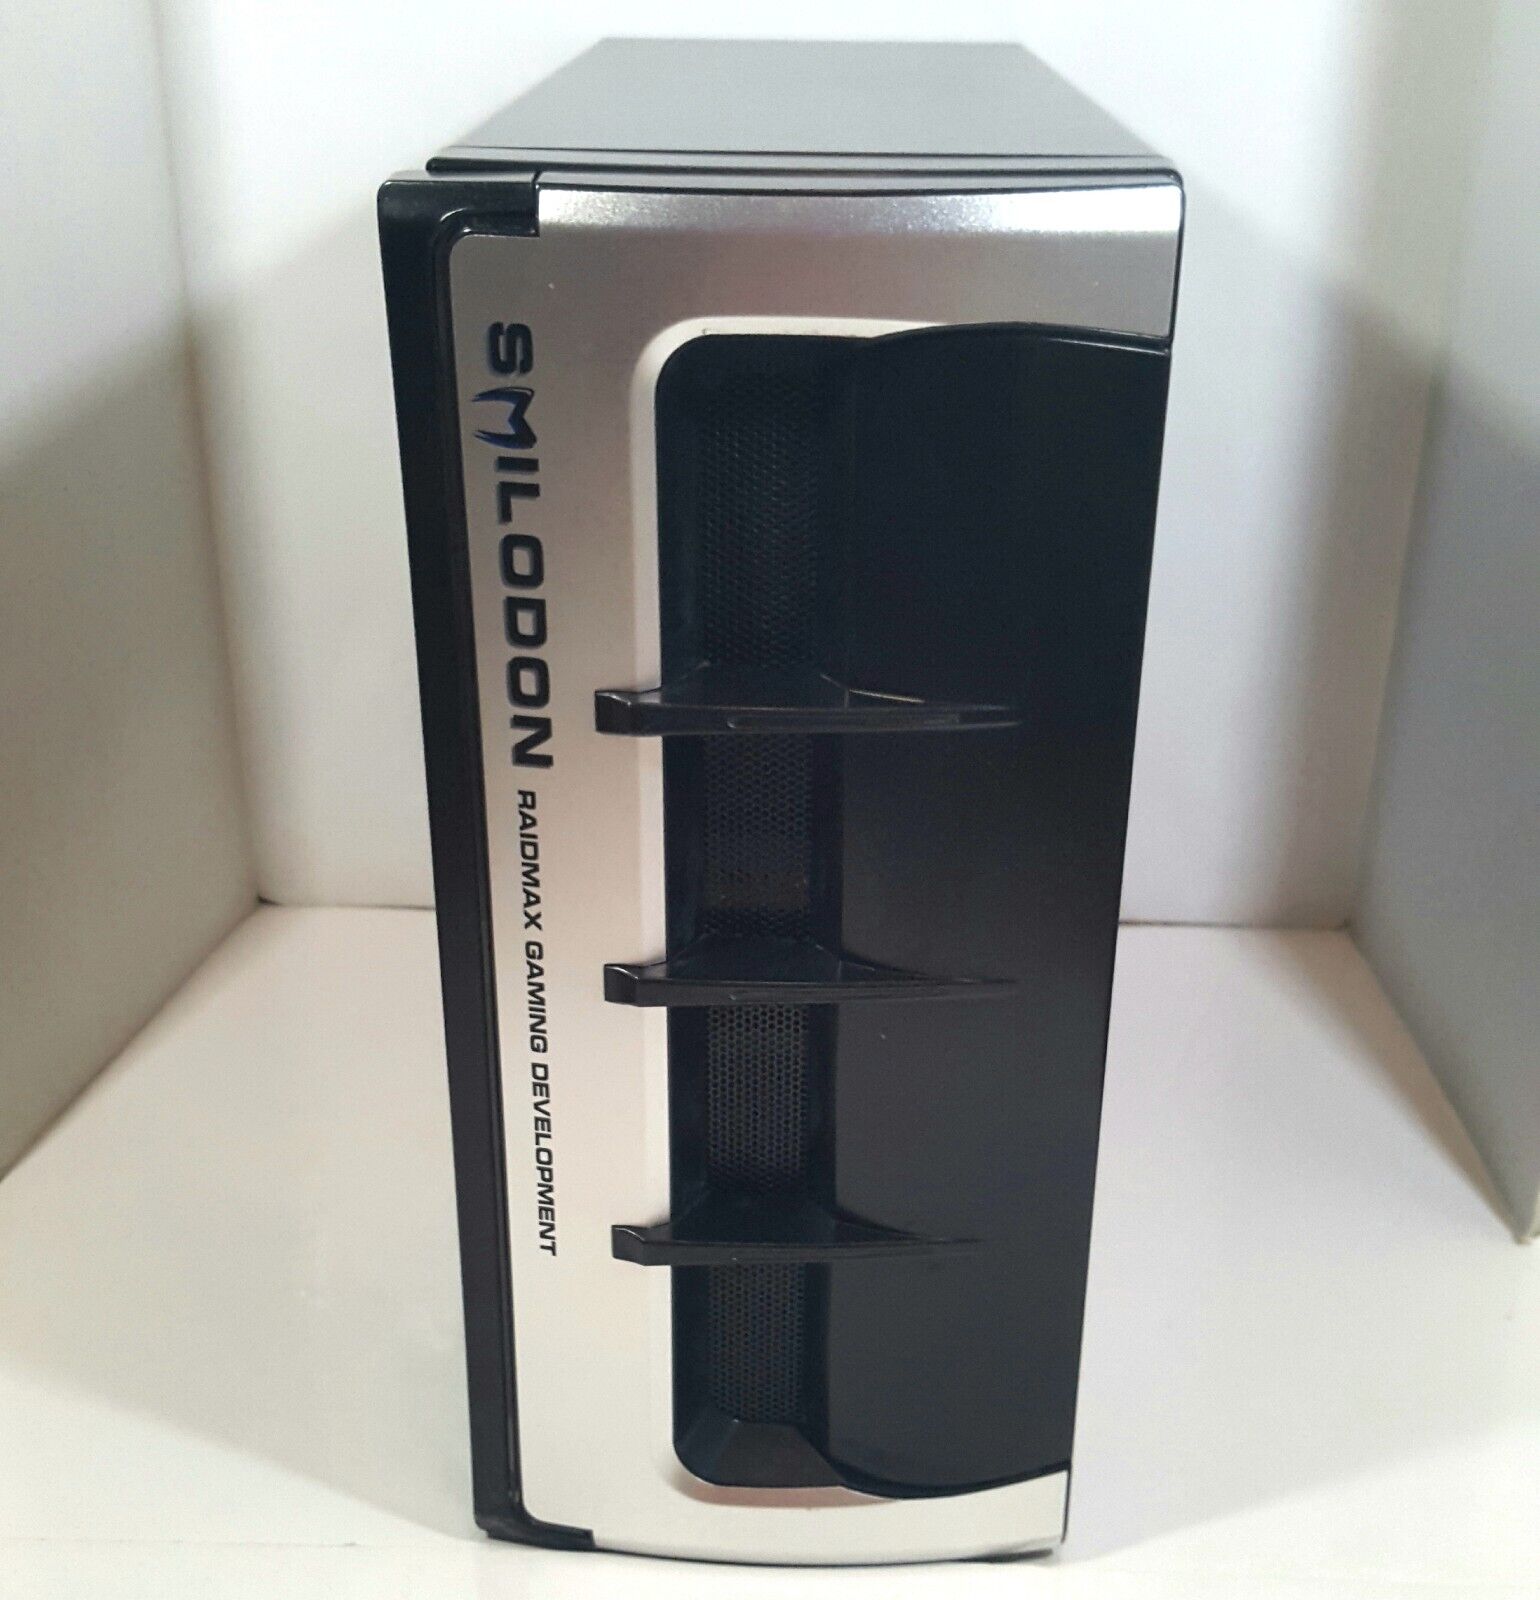 RaidMax Smilodon Gaming Silver Black Mid Tower PC Case With Dirk Tooth 